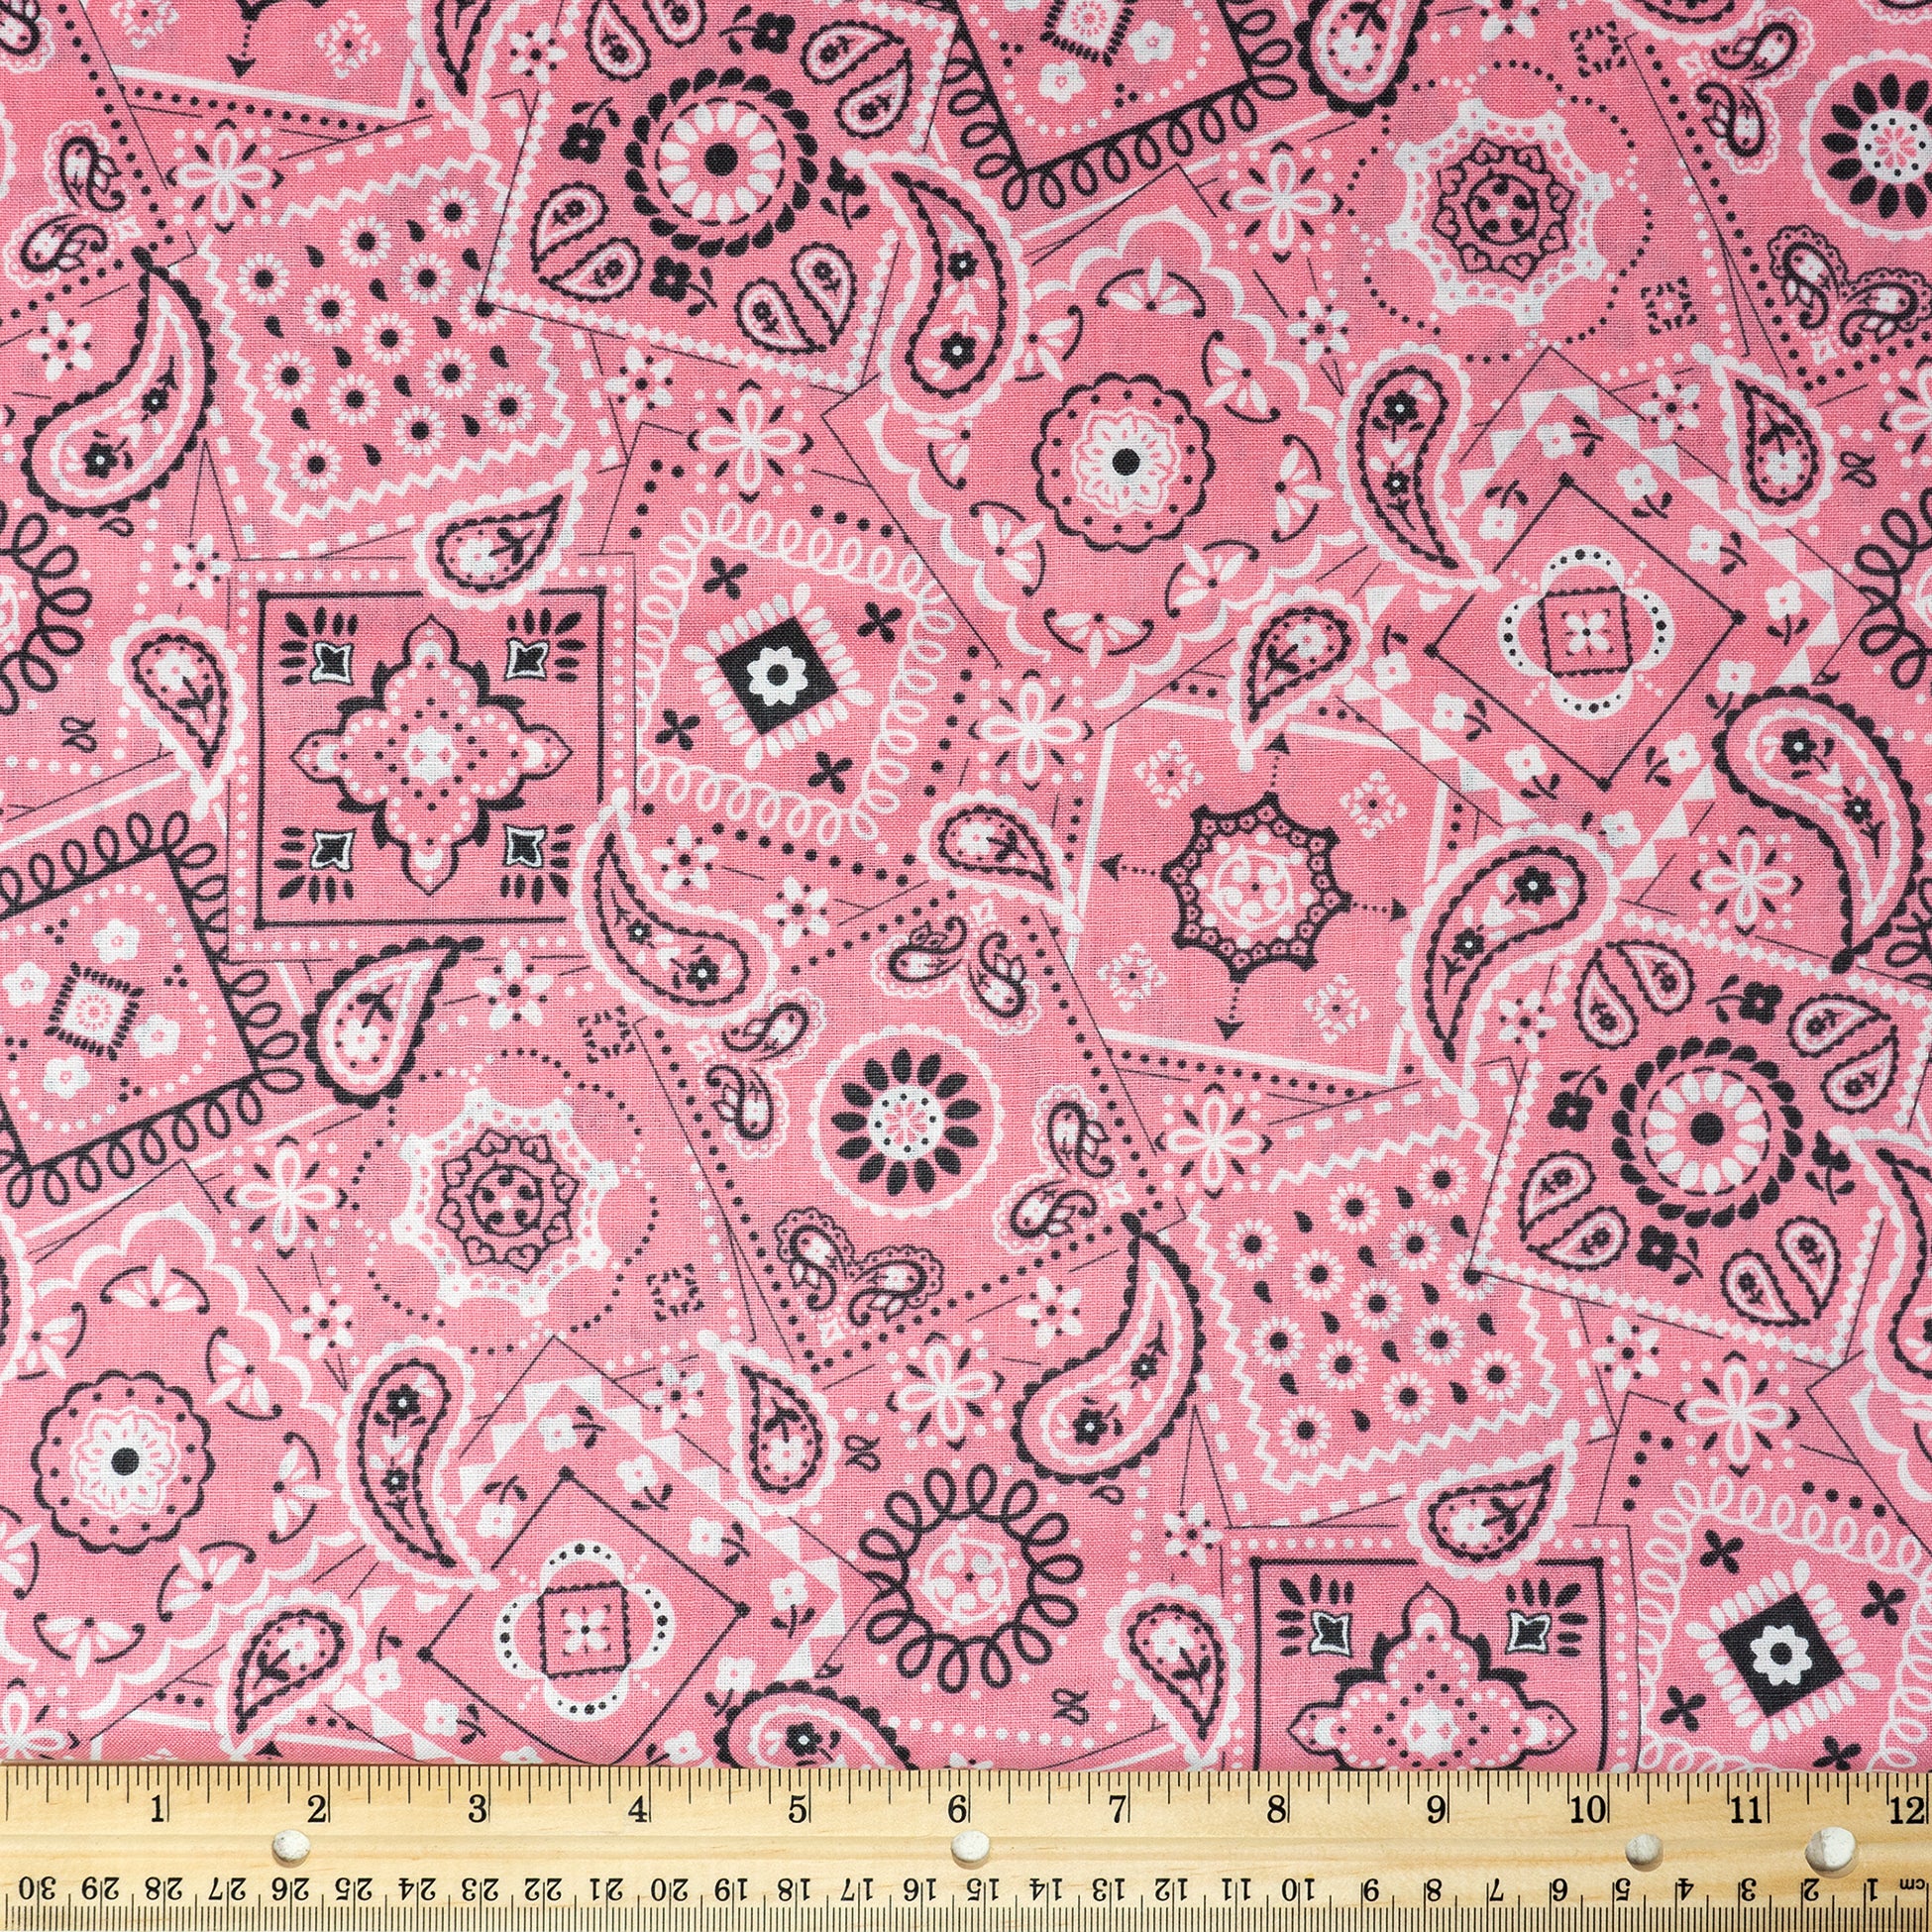 Waverly Inspirations Cotton 44" Bandana Pink Color Sewing Fabric by the Yard